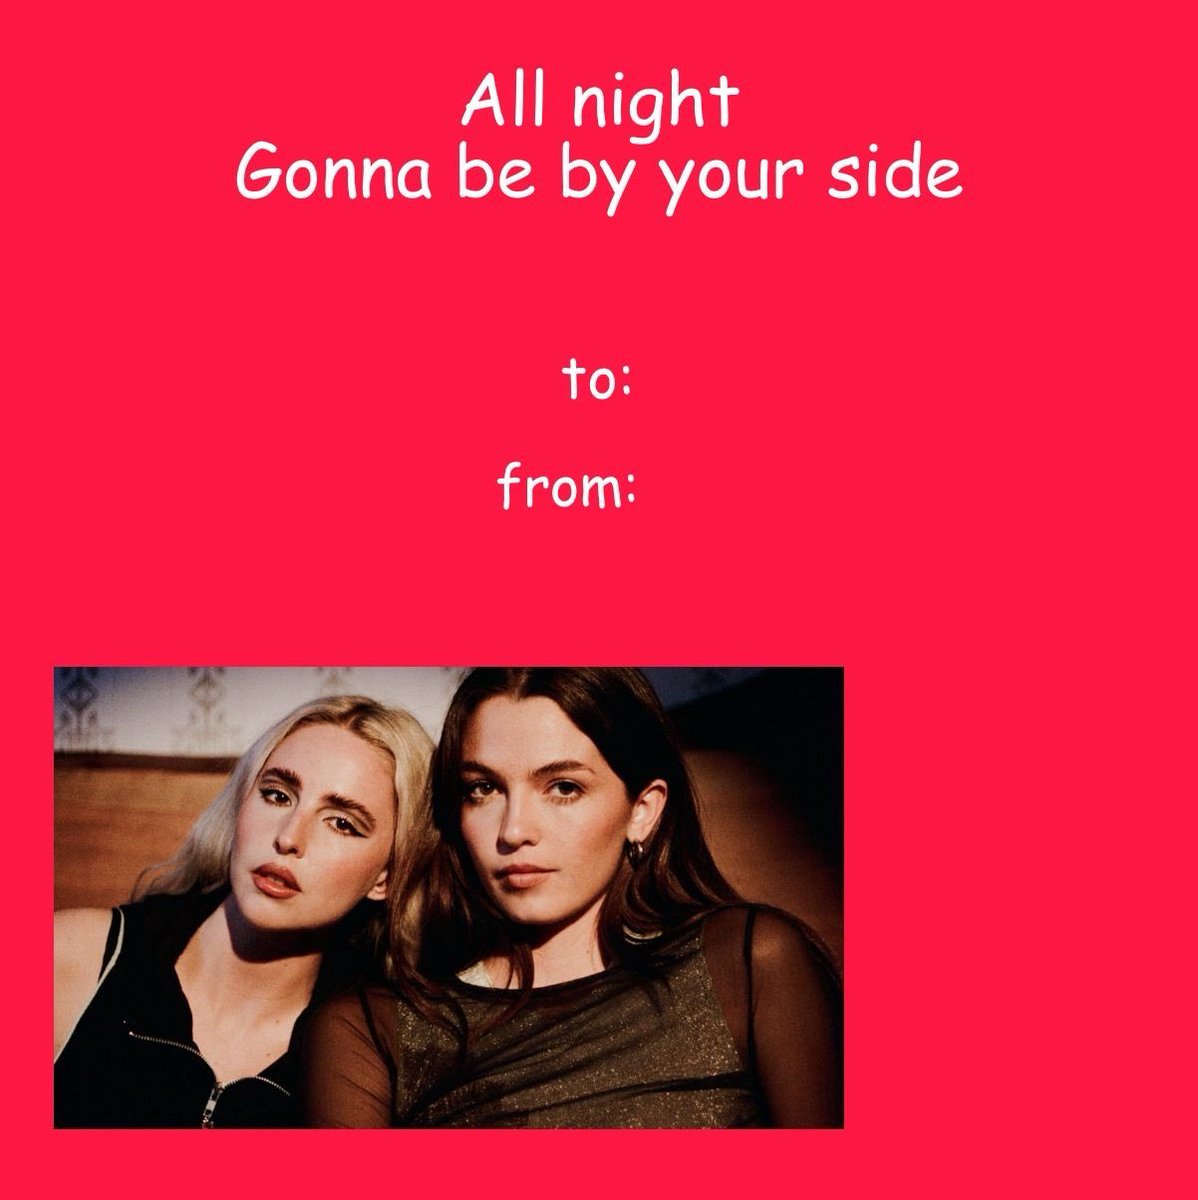 HAPPY VALENTINES DAY🌹 to: you from: @ClassicLaurel + kita